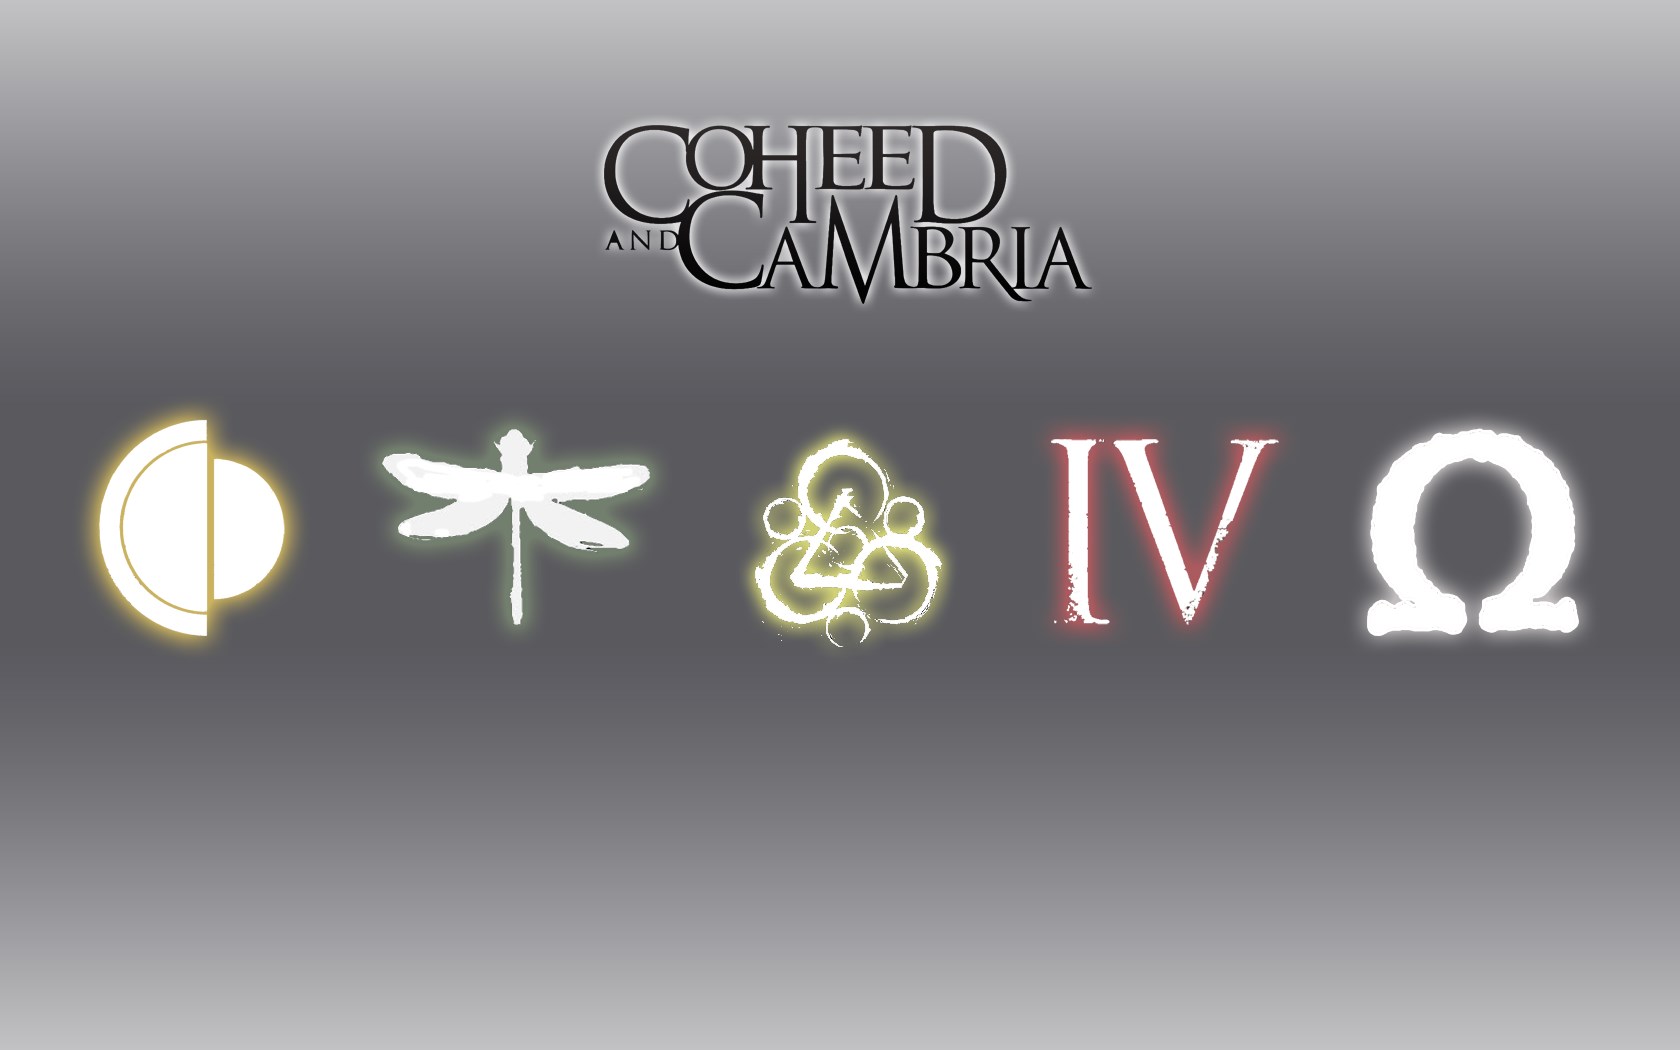 Free High Resolution Wallpaper Coheed And Cambria - Coheed And Cambria Background , HD Wallpaper & Backgrounds